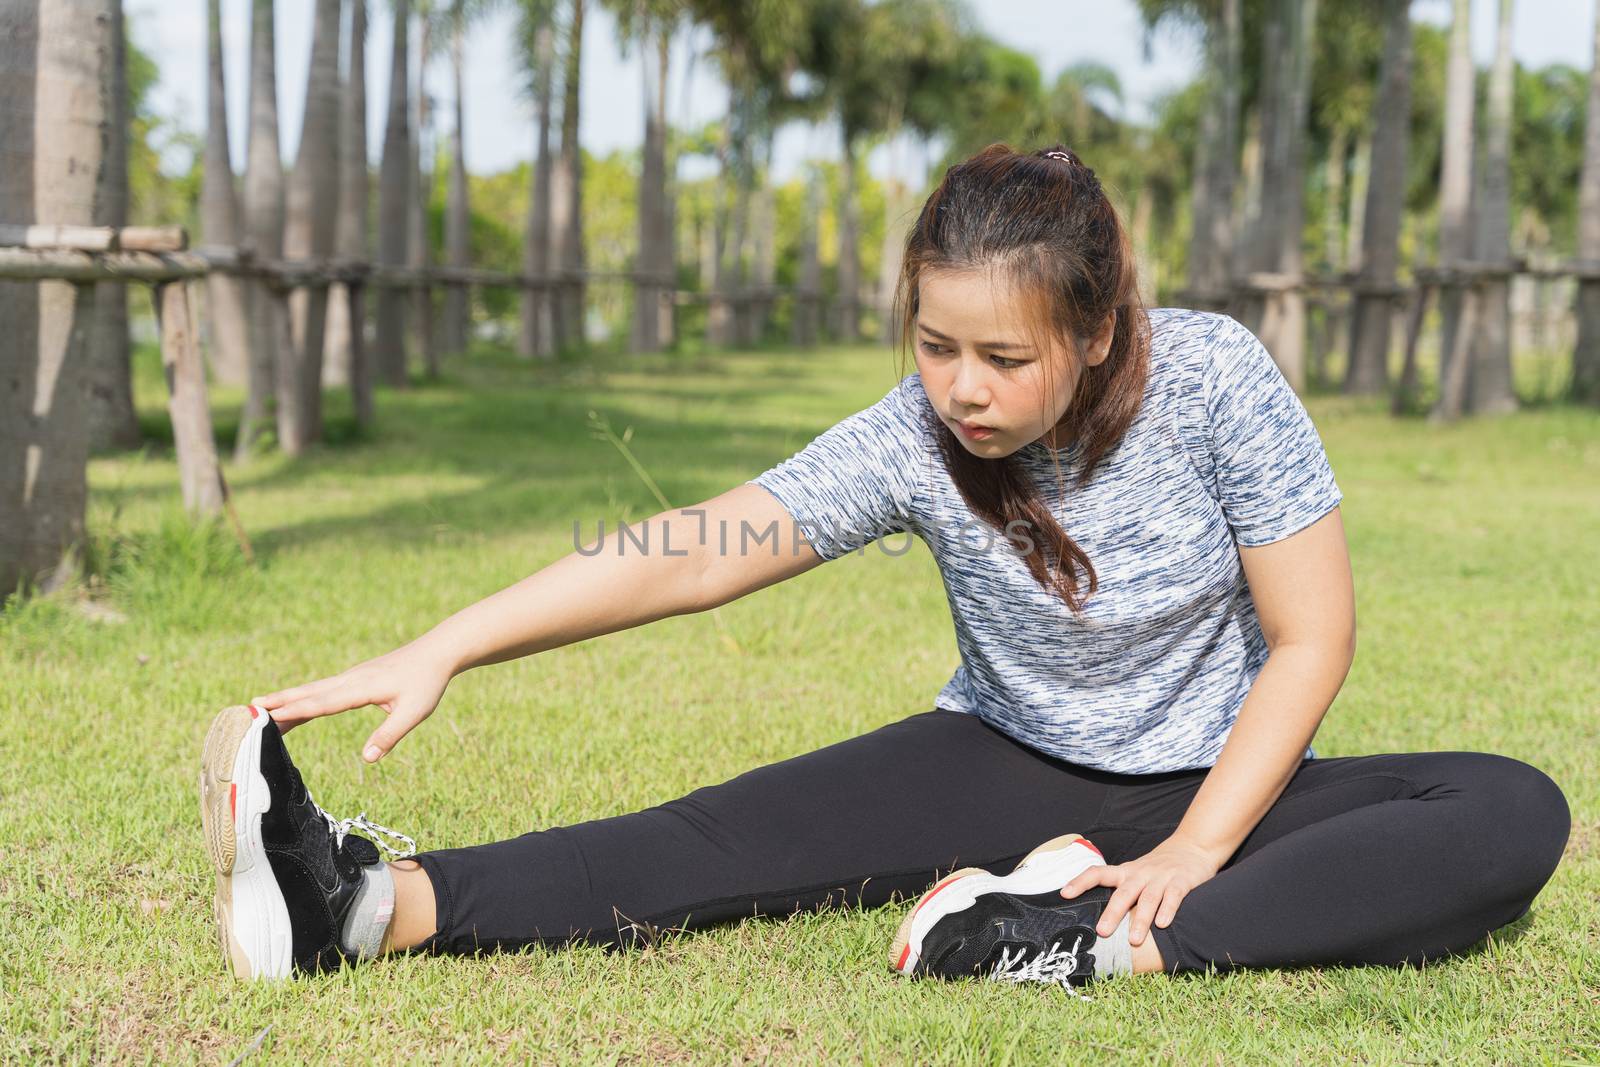 Young female stretching her legs before workout training session at the park. Healthy young woman warming up outdoors. Healthy and Lifestyle Concept.